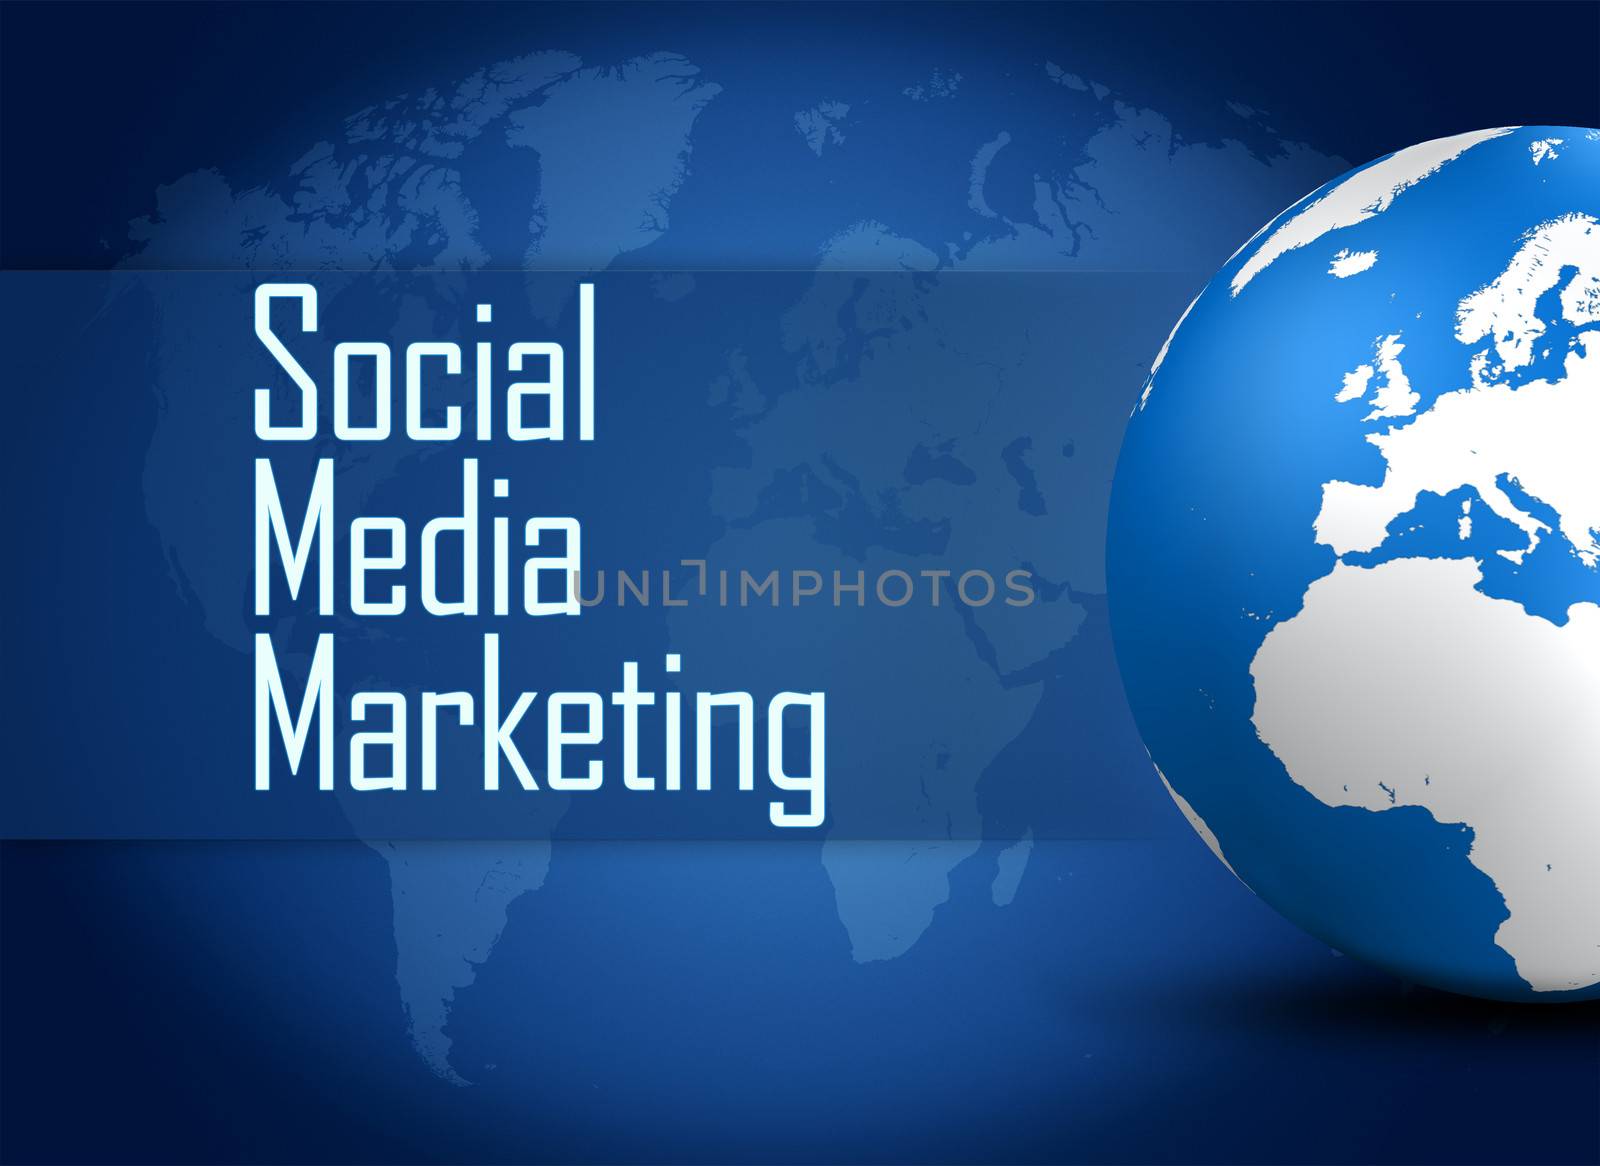 Social Media Marketing concept  with globe on blue background